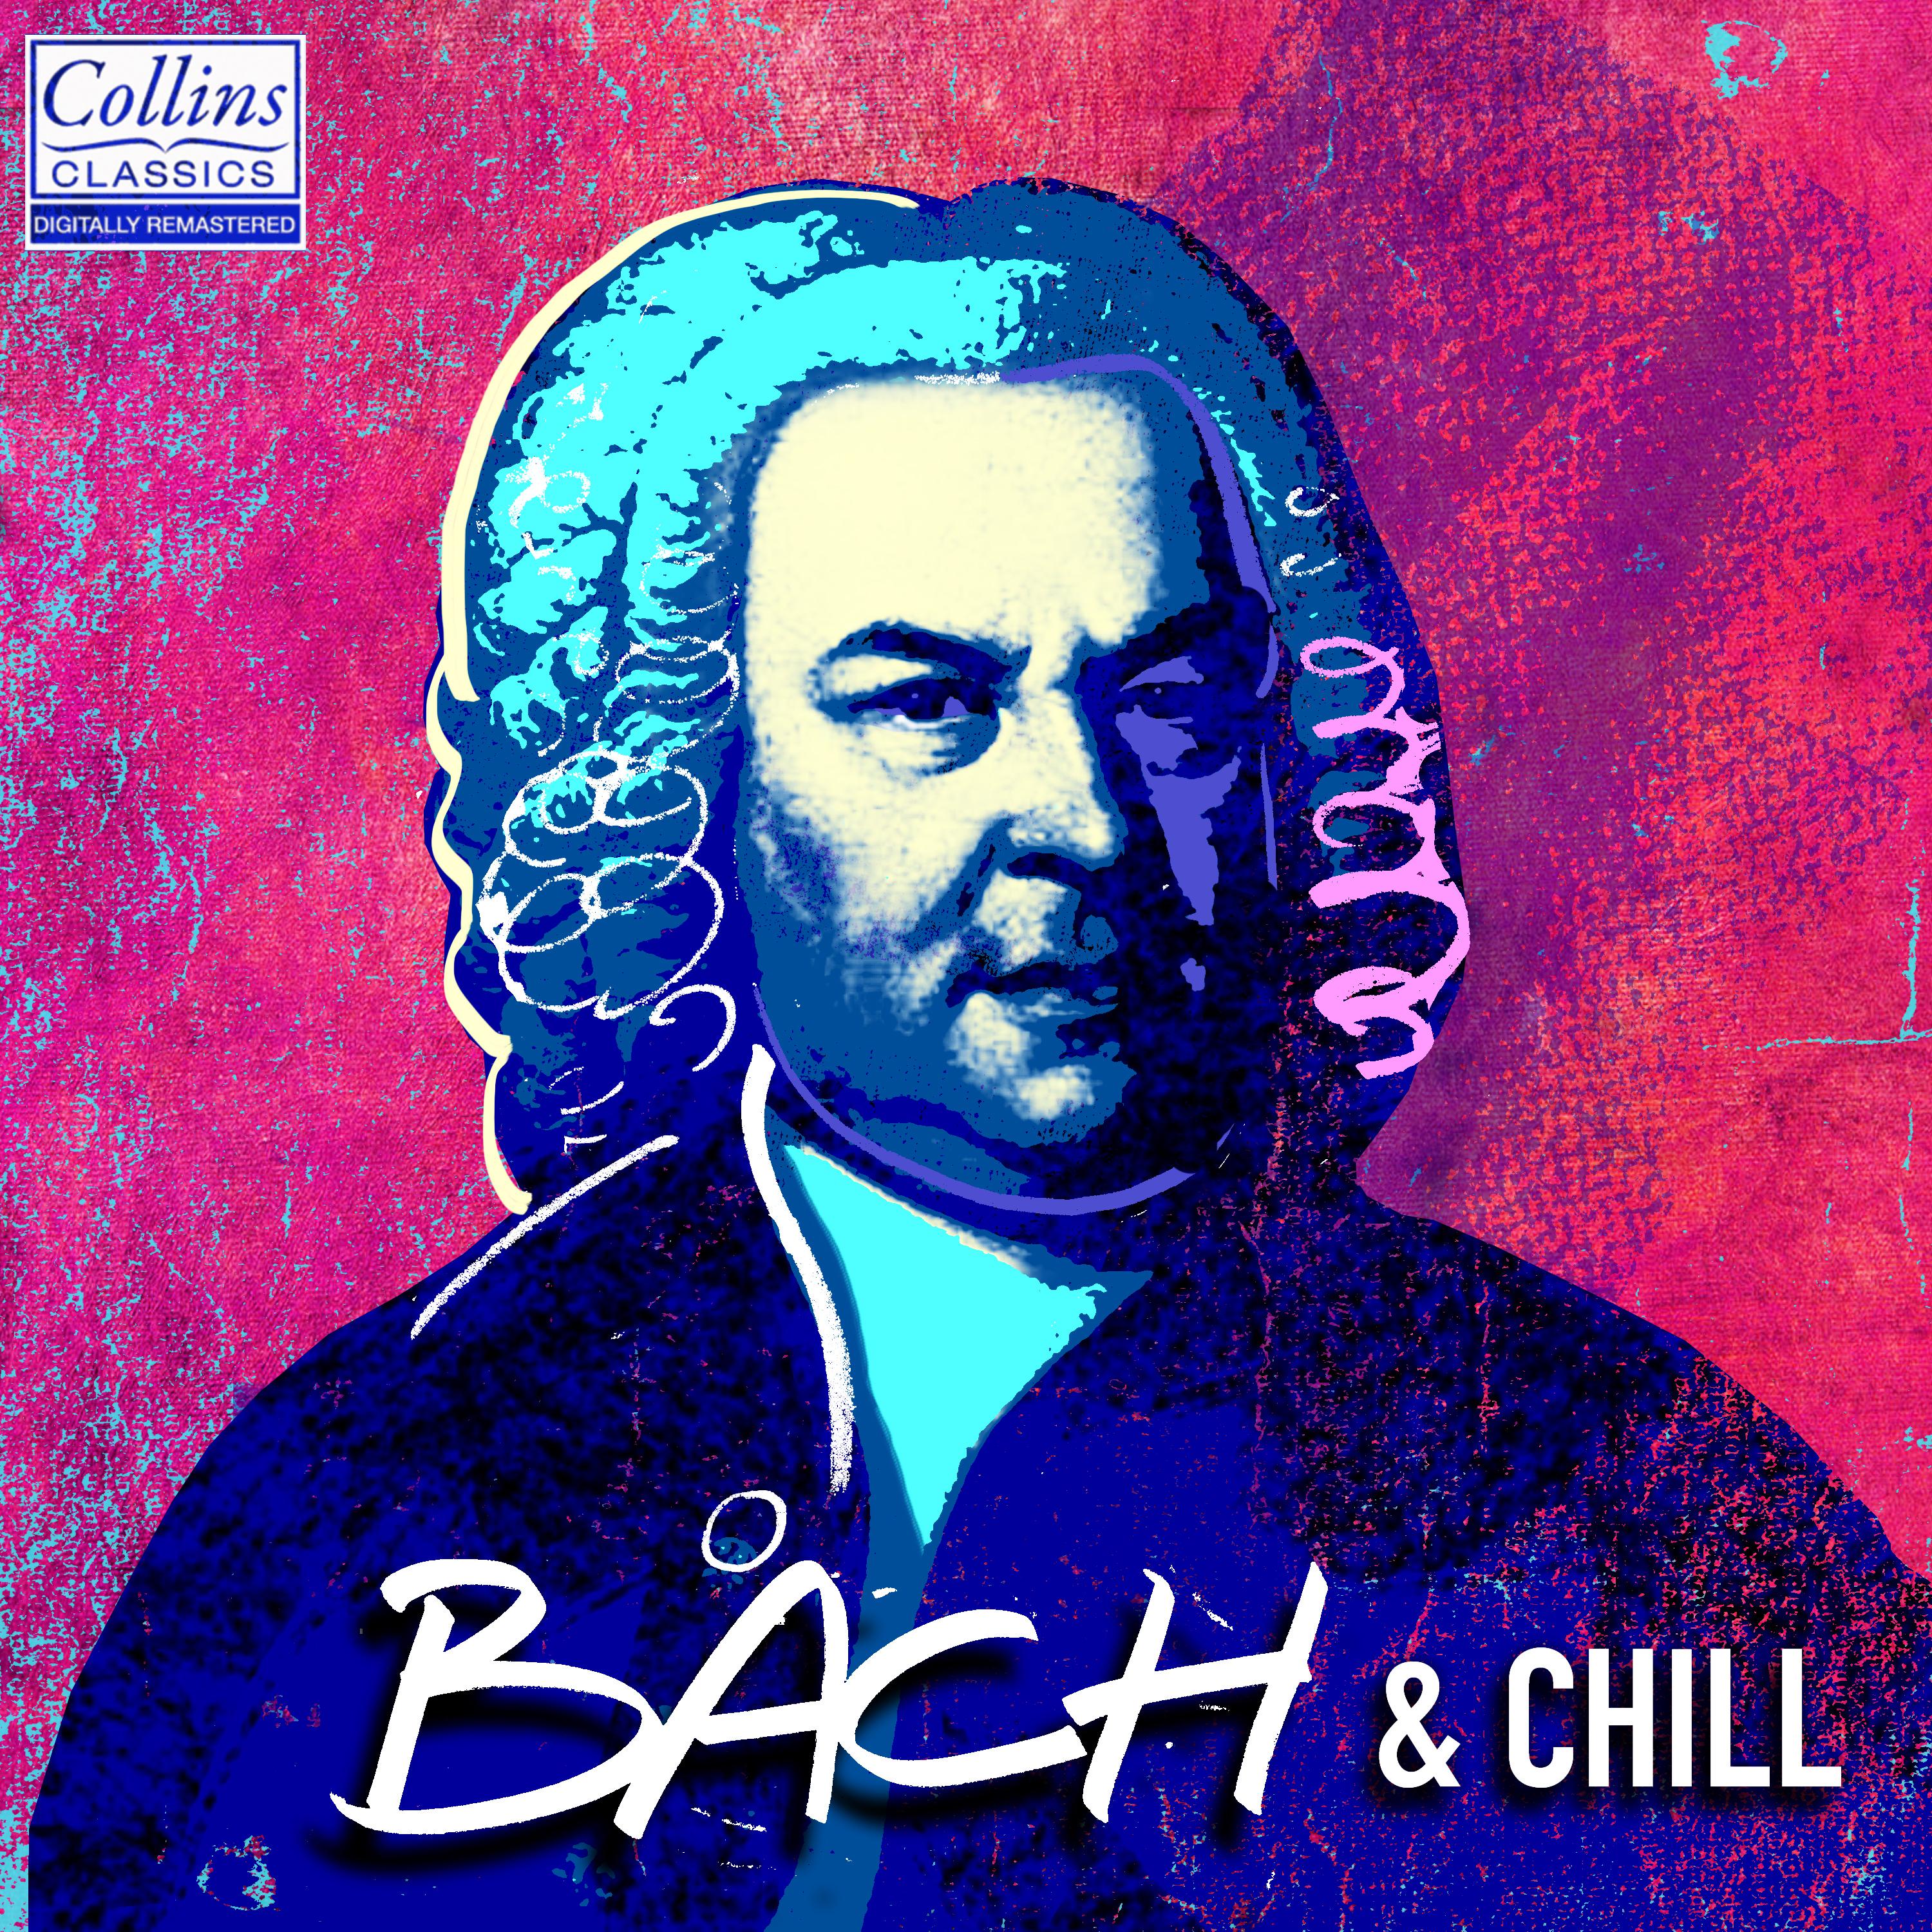 Bach and Chill